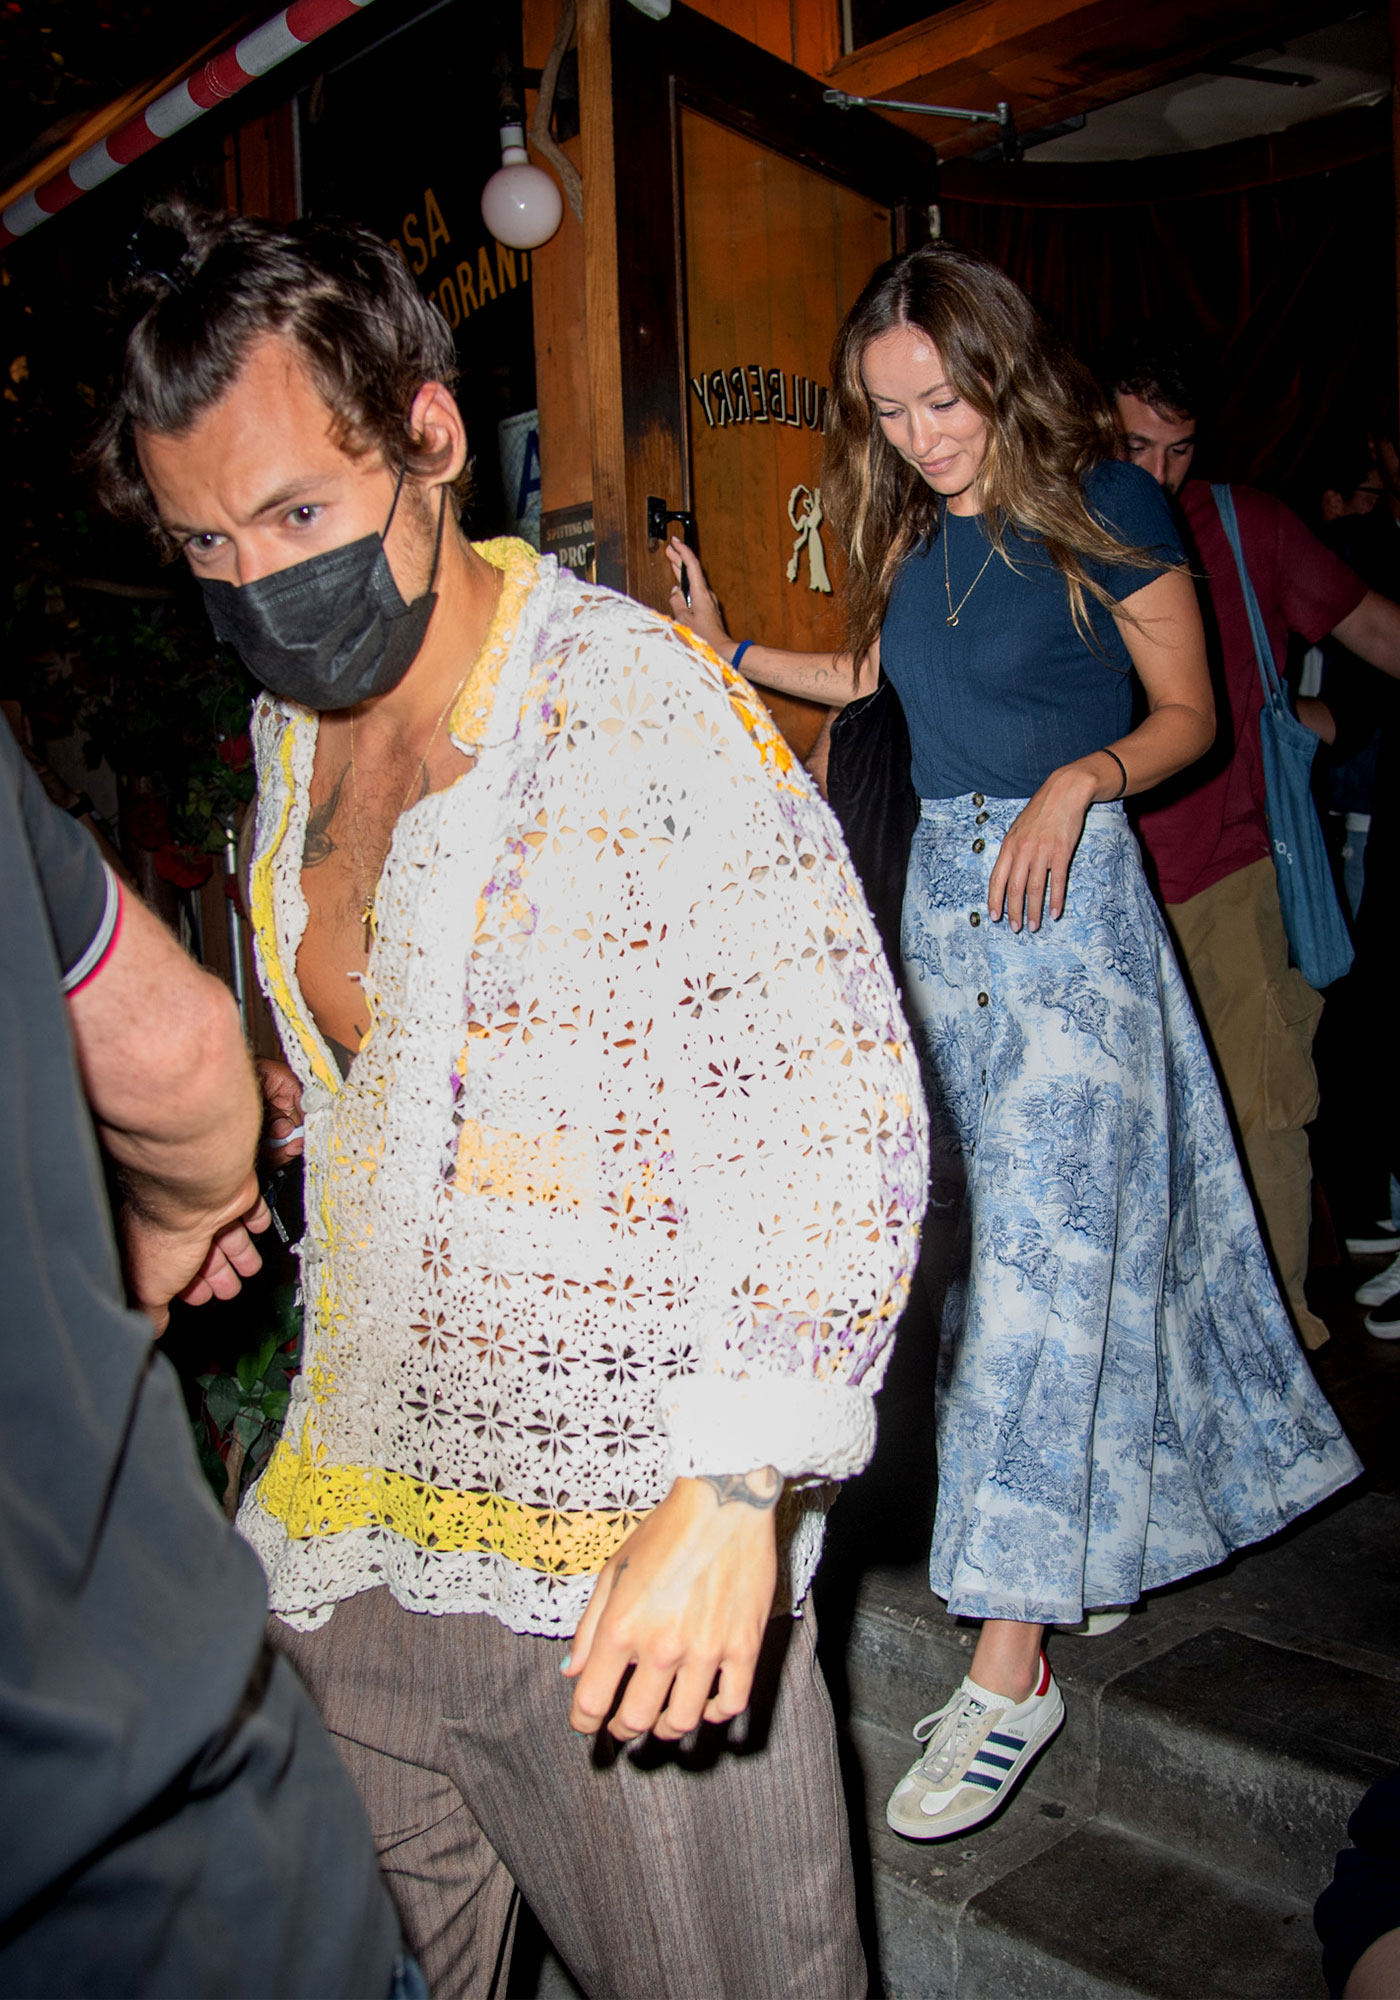 https://www.usmagazine.com/wp-content/uploads/2022/08/Harry-Styles-Olivia-Wilde-Hold-Hands-NYC-Date-Night-Photos-002.jpg?quality=40&strip=all